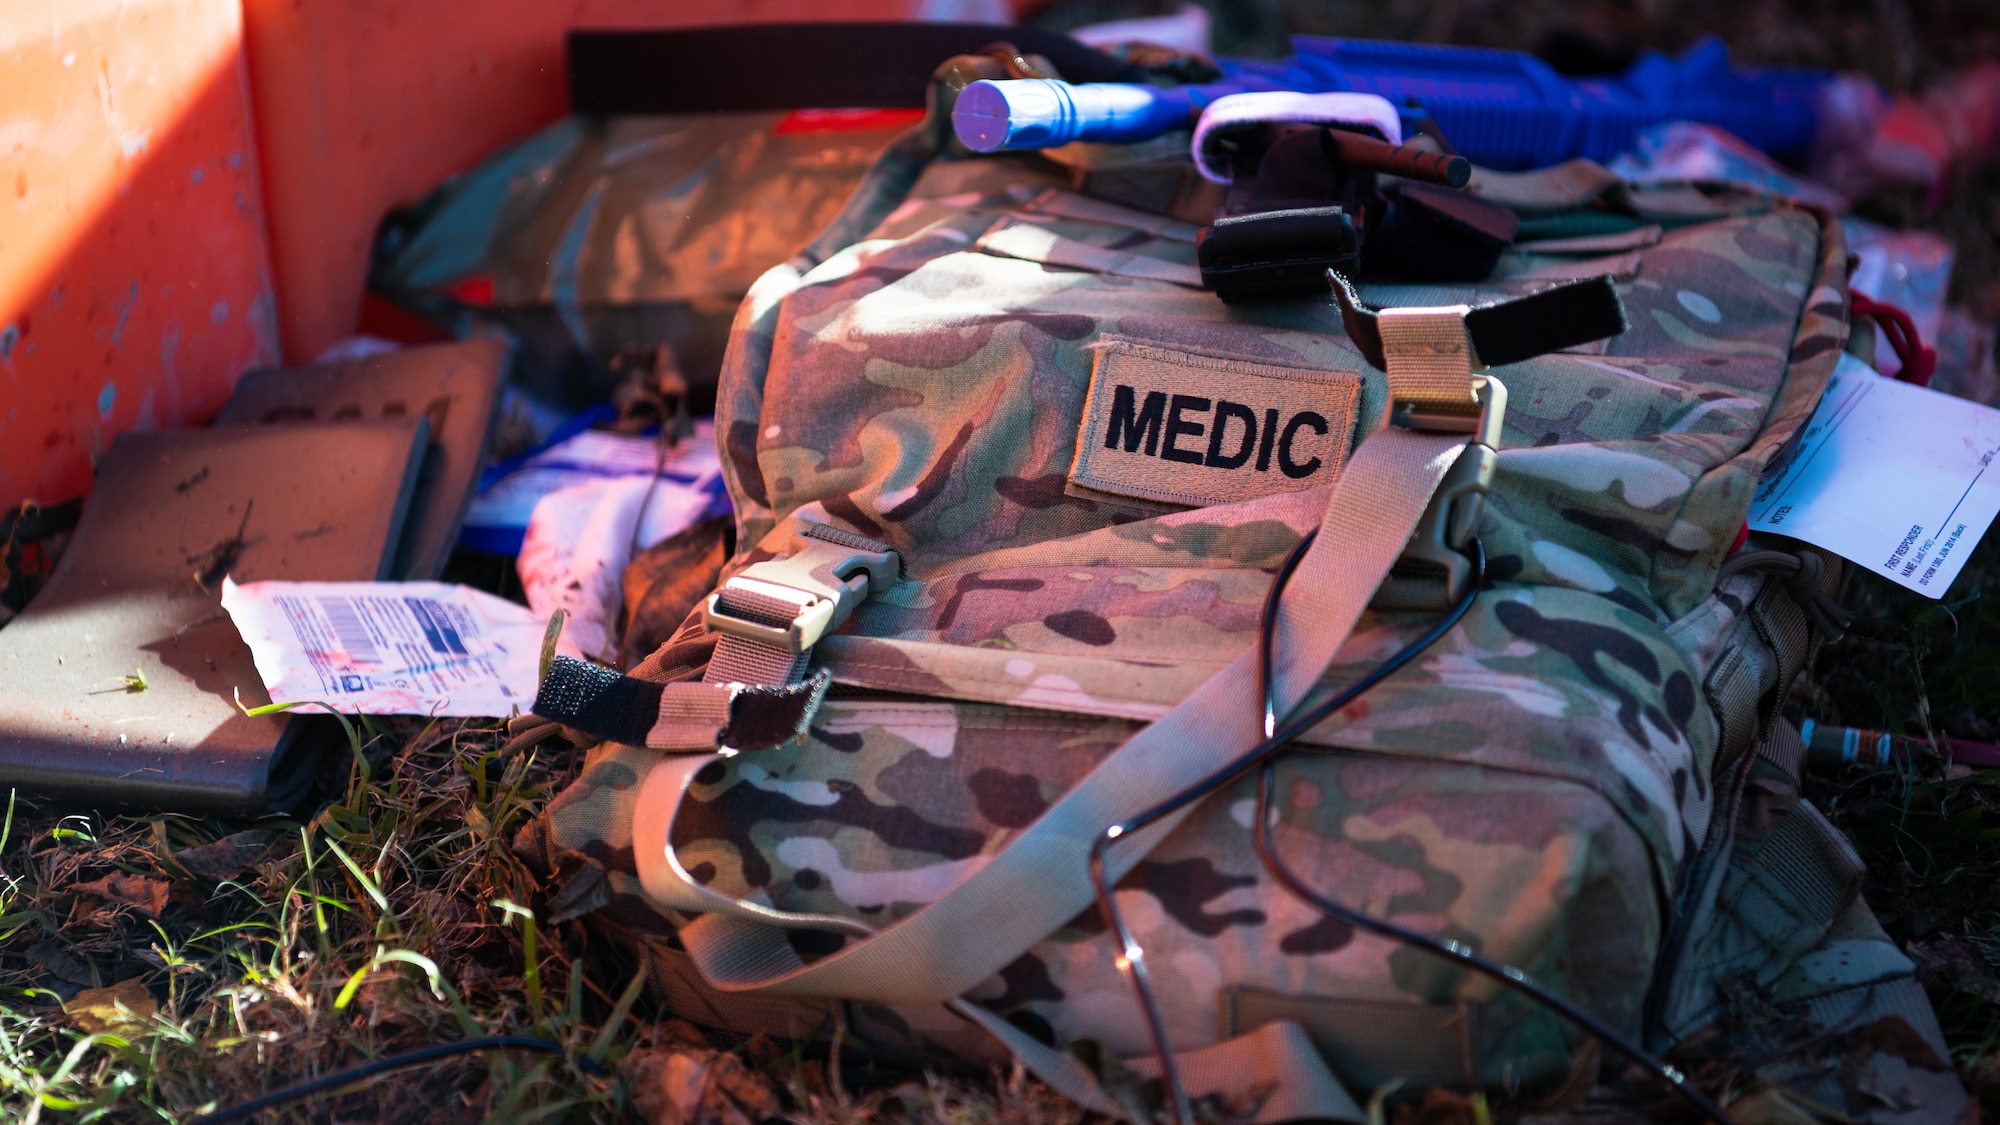 A 2nd Medical Group Tactical Combat Casualty Care (TCCC) bag sits on the ground during a TCCC field training exercise at Barksdale Air Force Base, La., Dec. 9 2020.